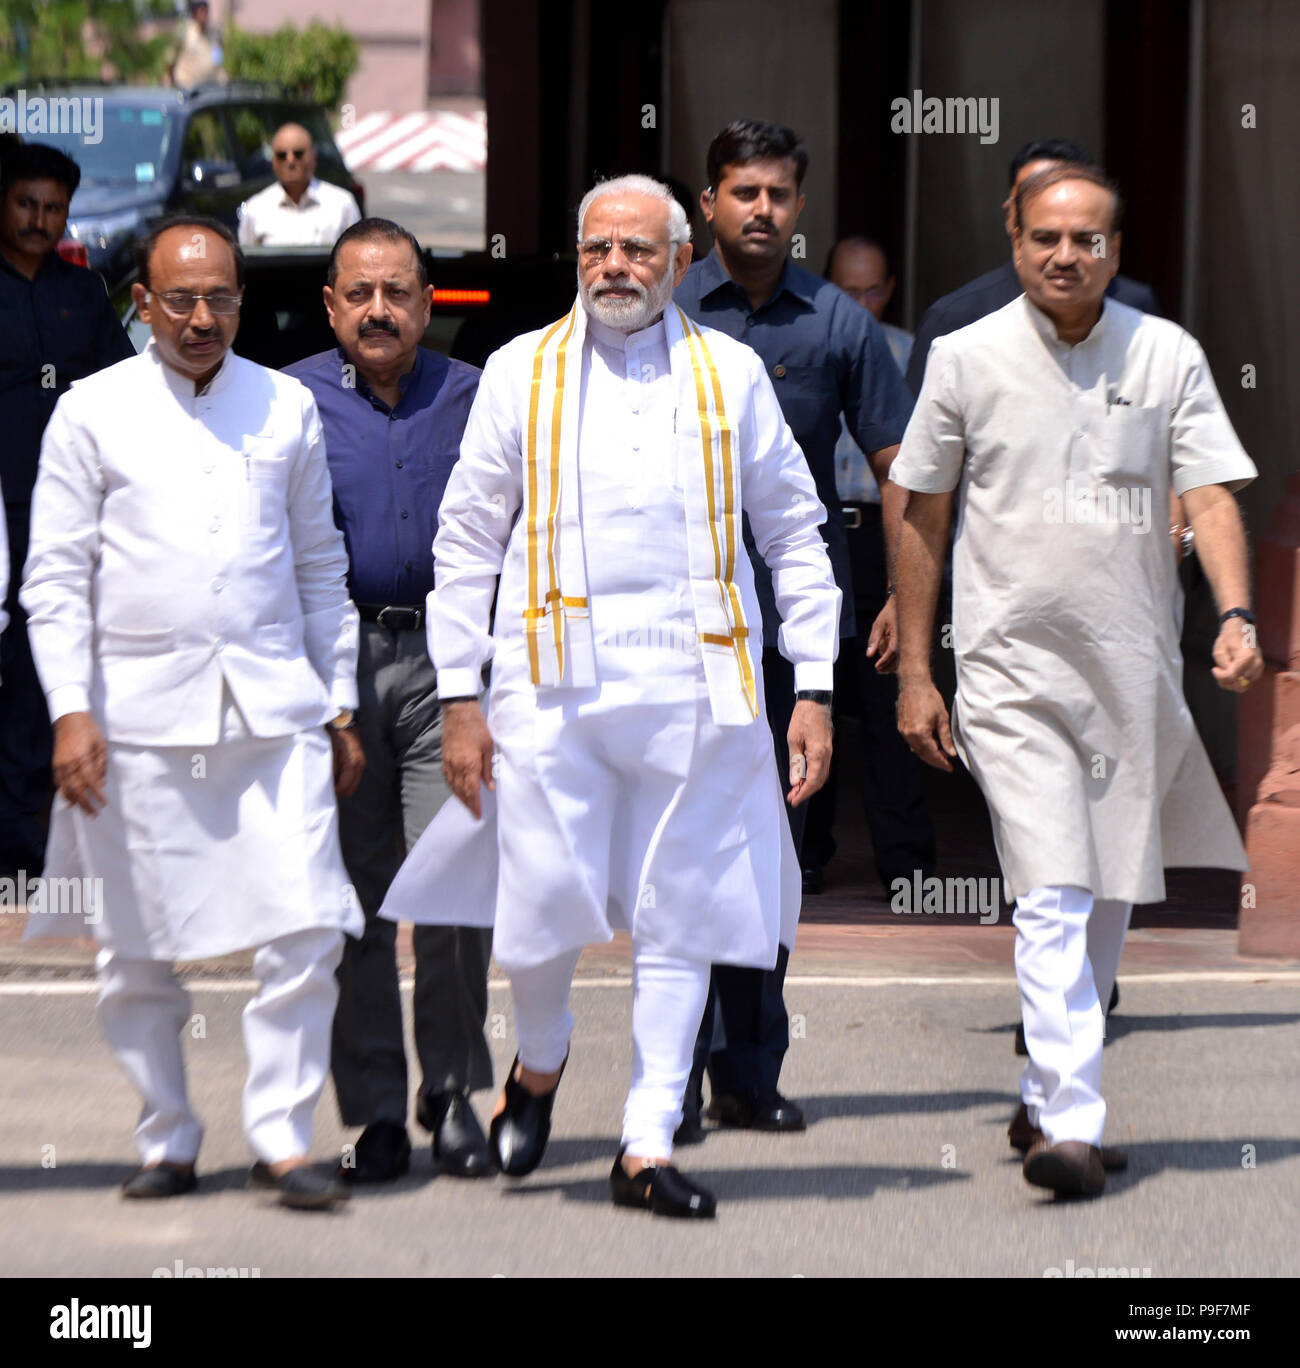 (180718) -- NEW DELHI, July 18, 2018 (Xinhua) -- Indian Prime Minister Narendra Modi (C) arrives on the opening day of the monsoon session of parliament in New Delhi, India, July 18, 2018. The monsoon session of parliament began on Wednesday and continue until August 10. (Xinhua/Partha Sarkar) (rh) Stock Photo